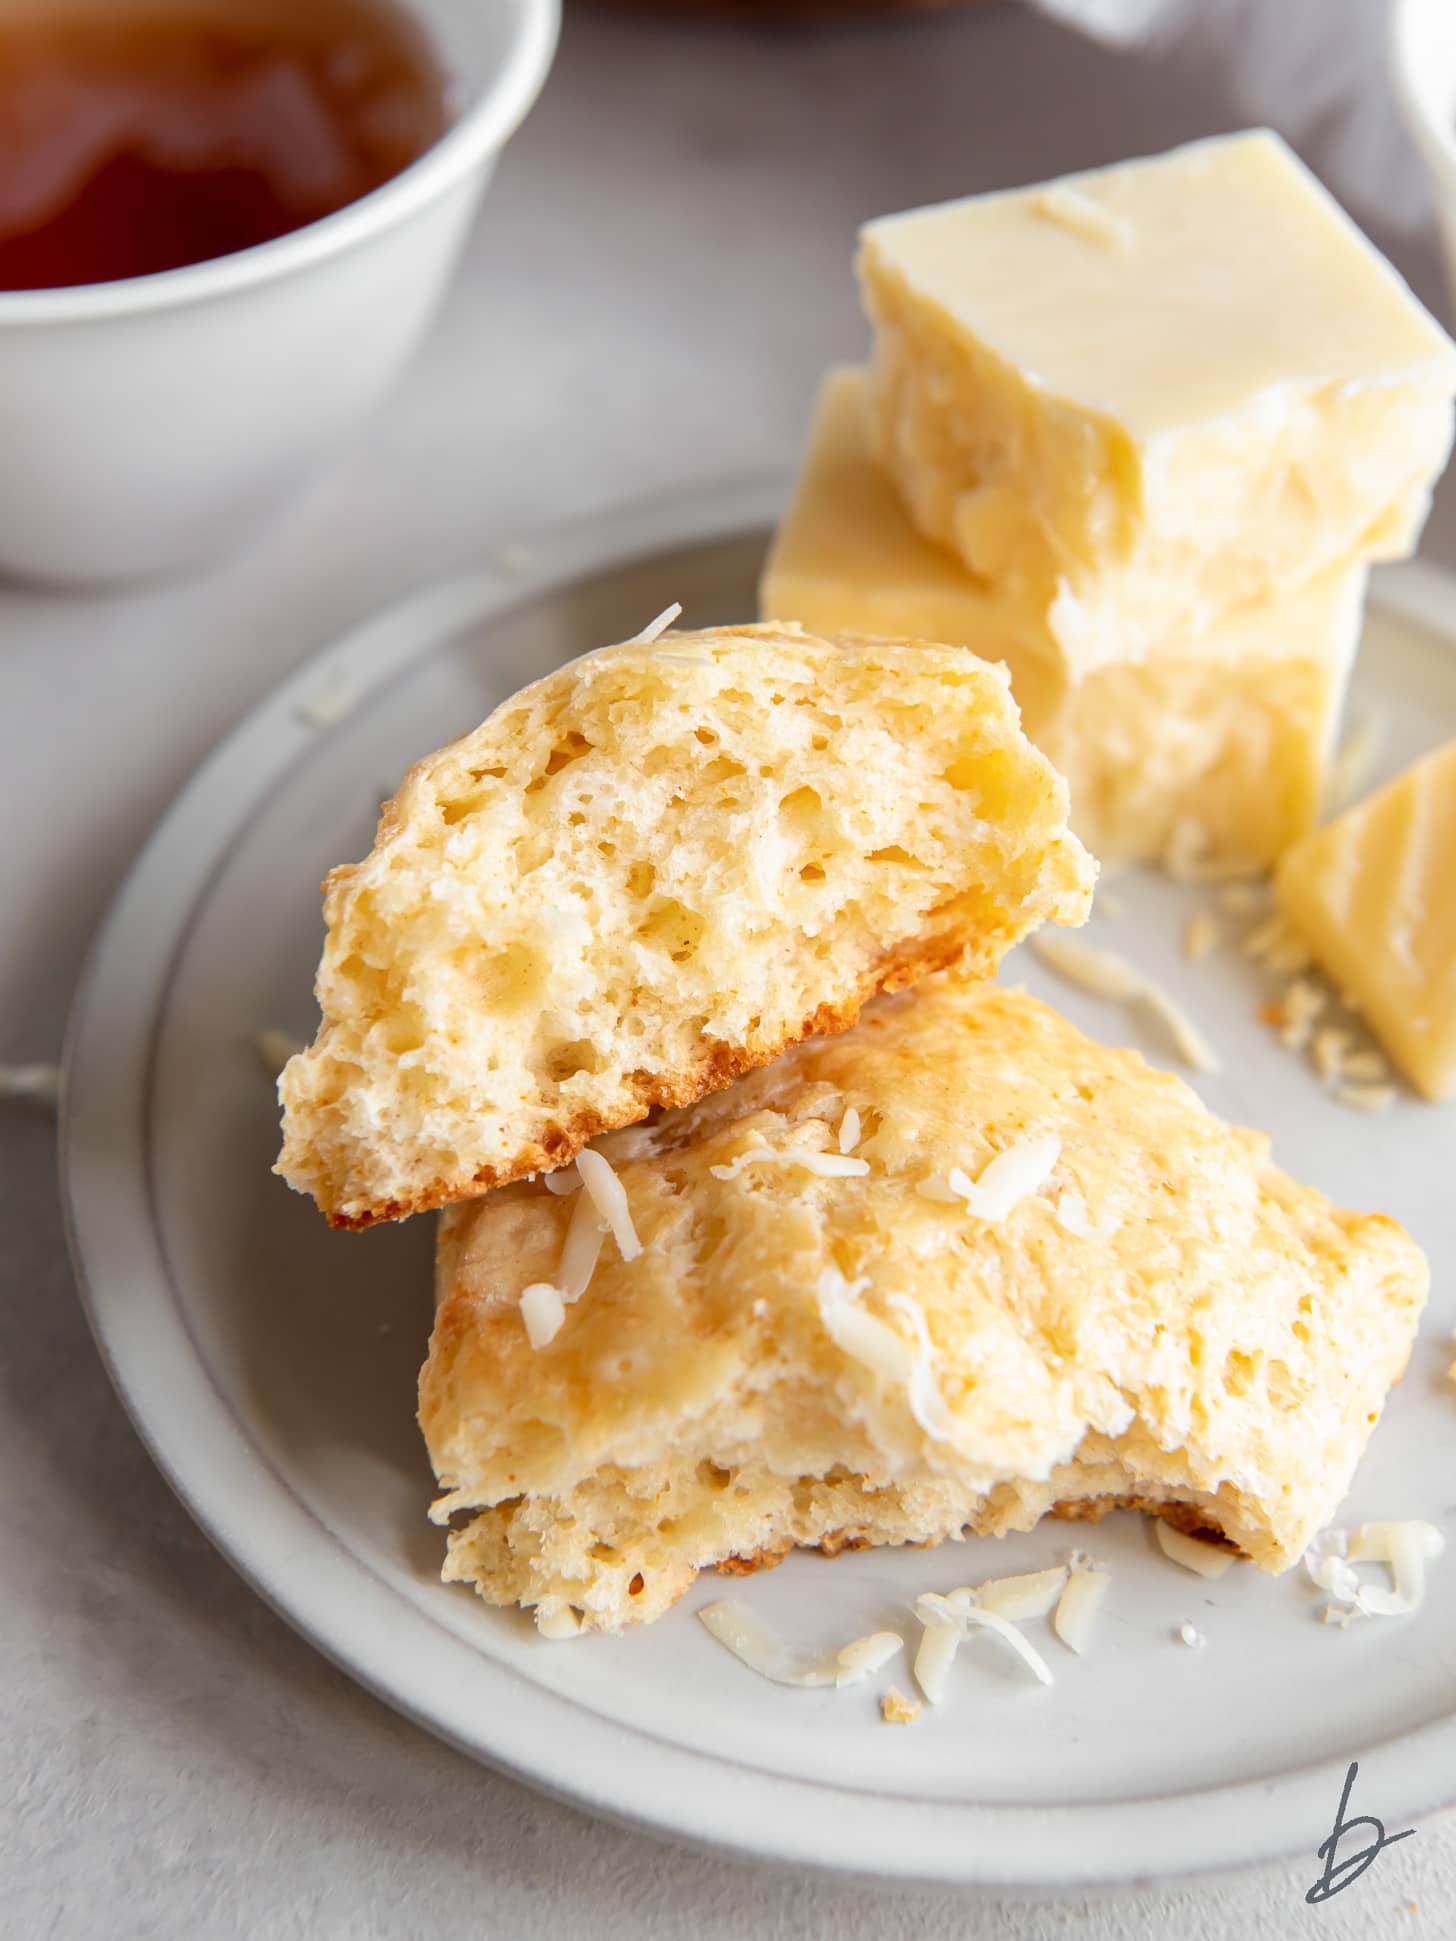 two halves of a fluffy cheese scone on a plate with a couple small squares of sharp cheddar cheese.